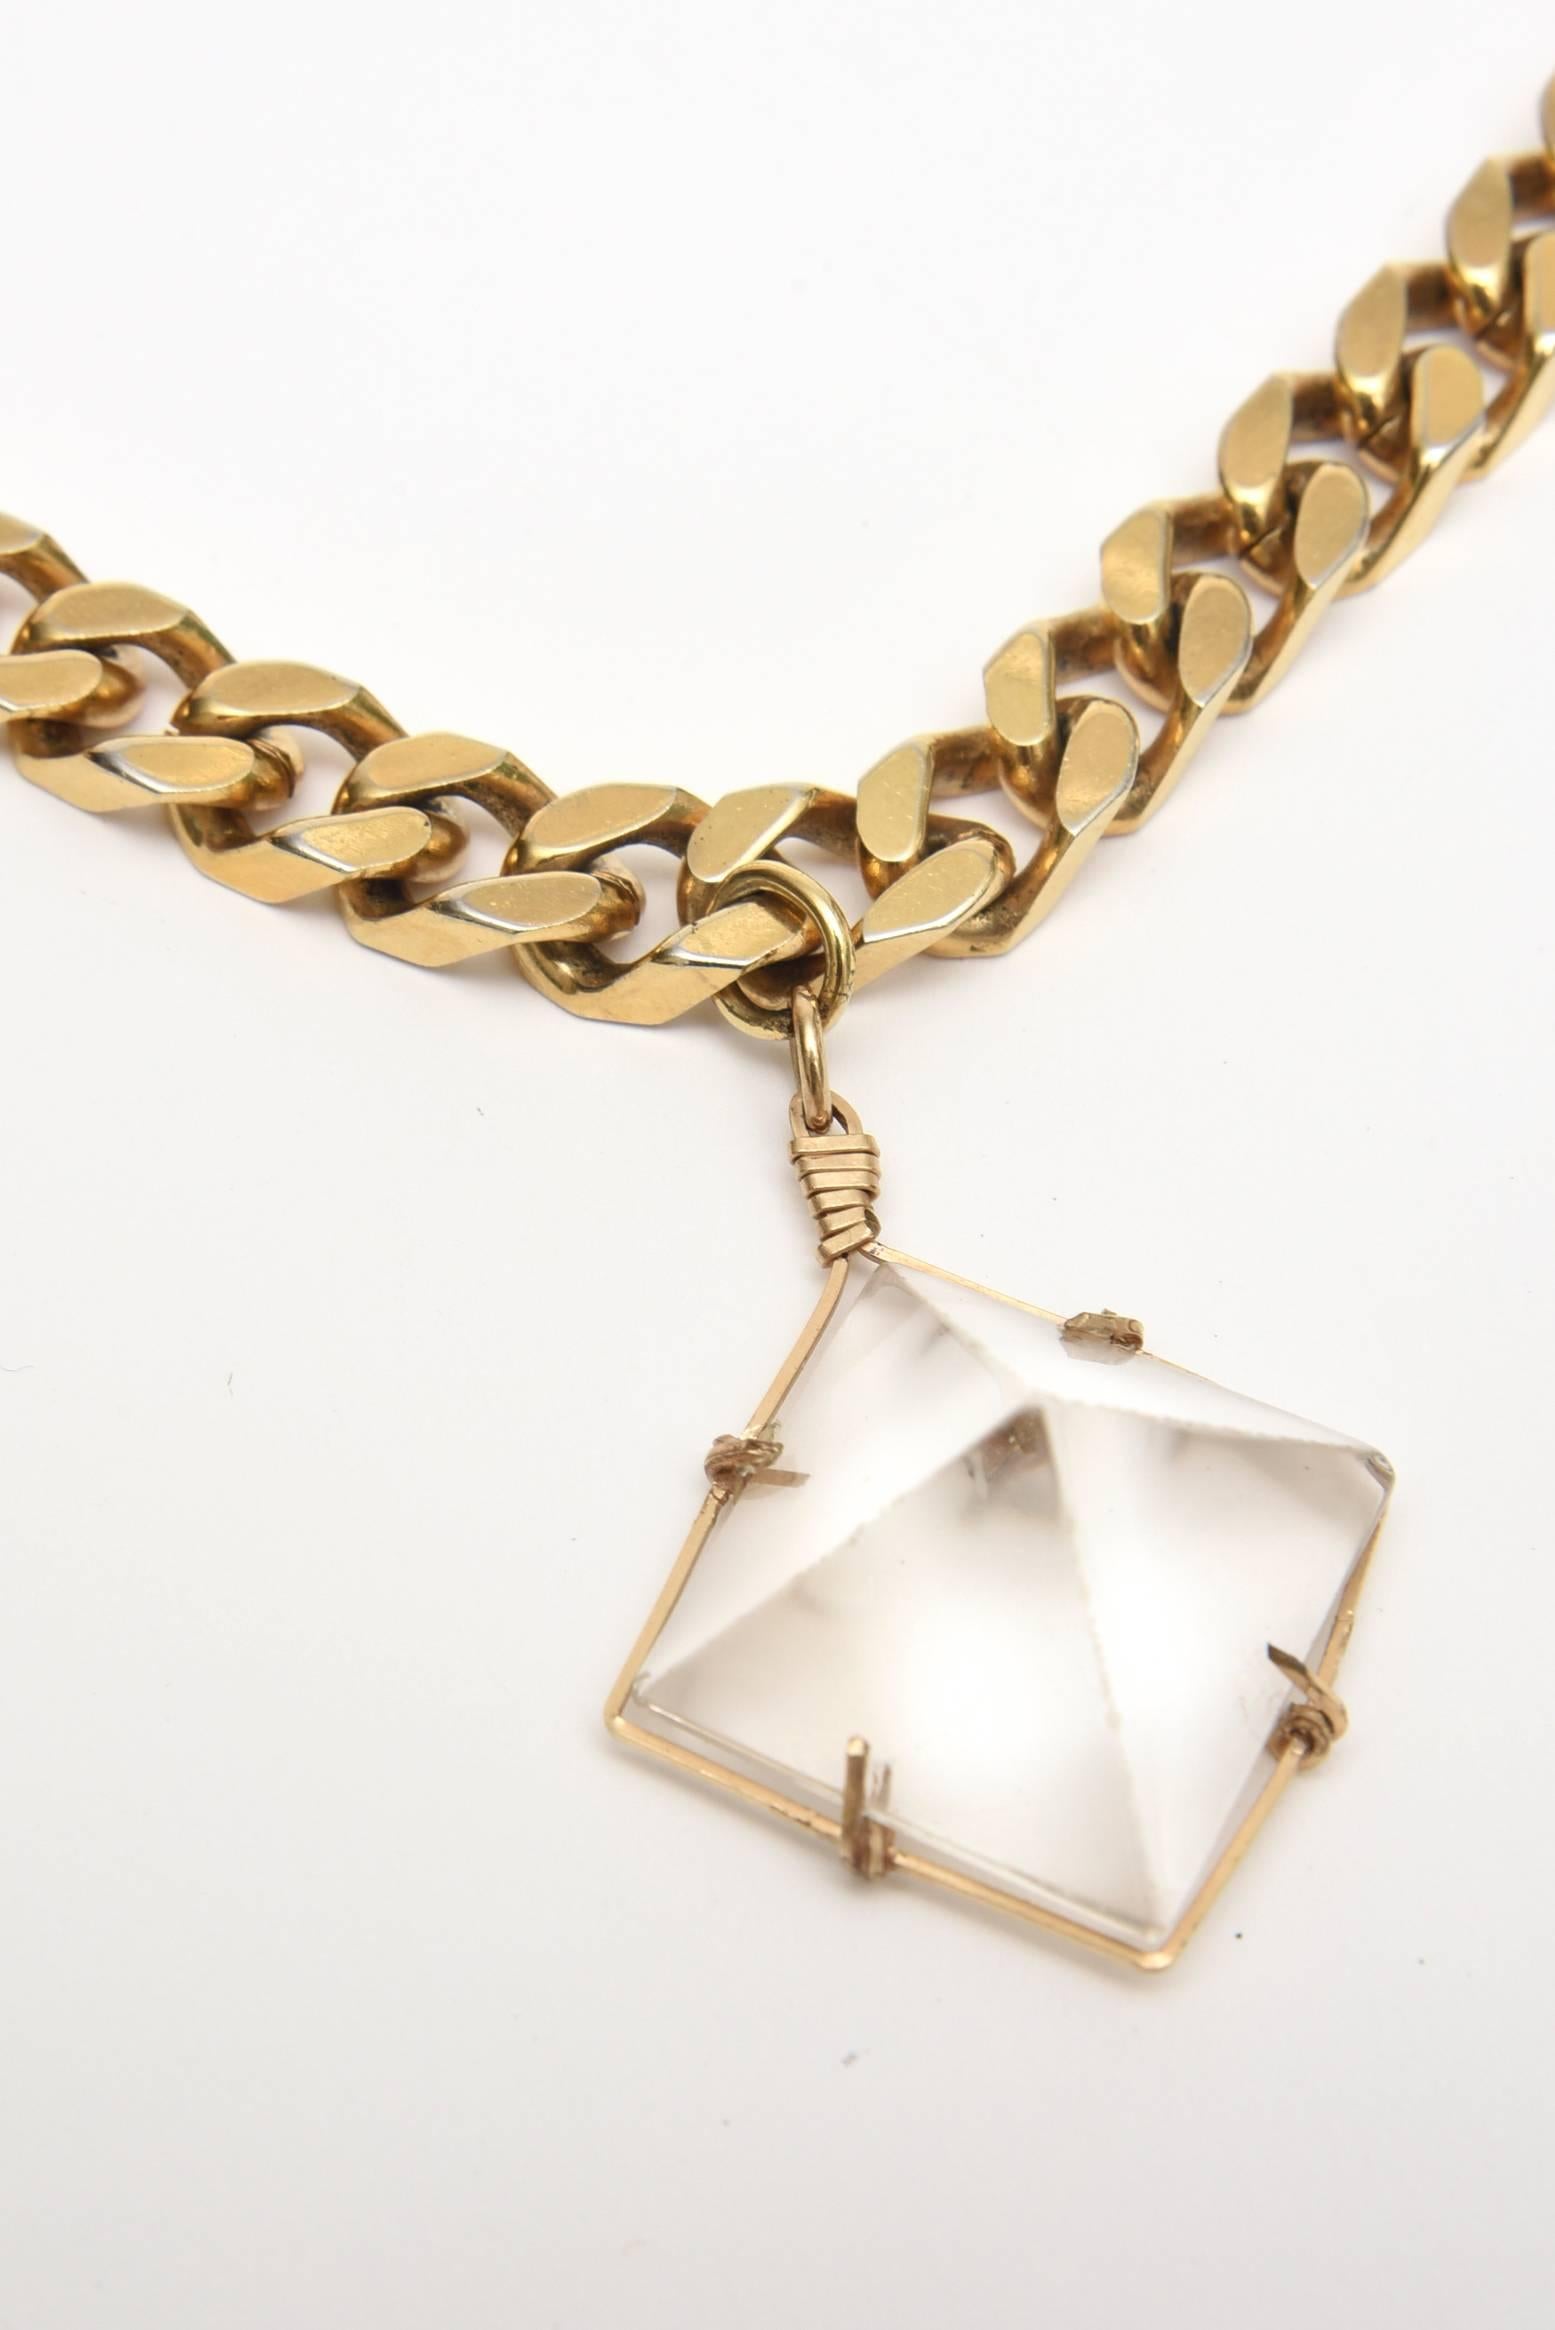 This wonderful great weight signed vintage Napier gold link chain necklace has 5 hanging pendants of white crystal. All the shapes are different. This necklace is timeless and modern. It is so in fashion now. It is an all season necklace can go day